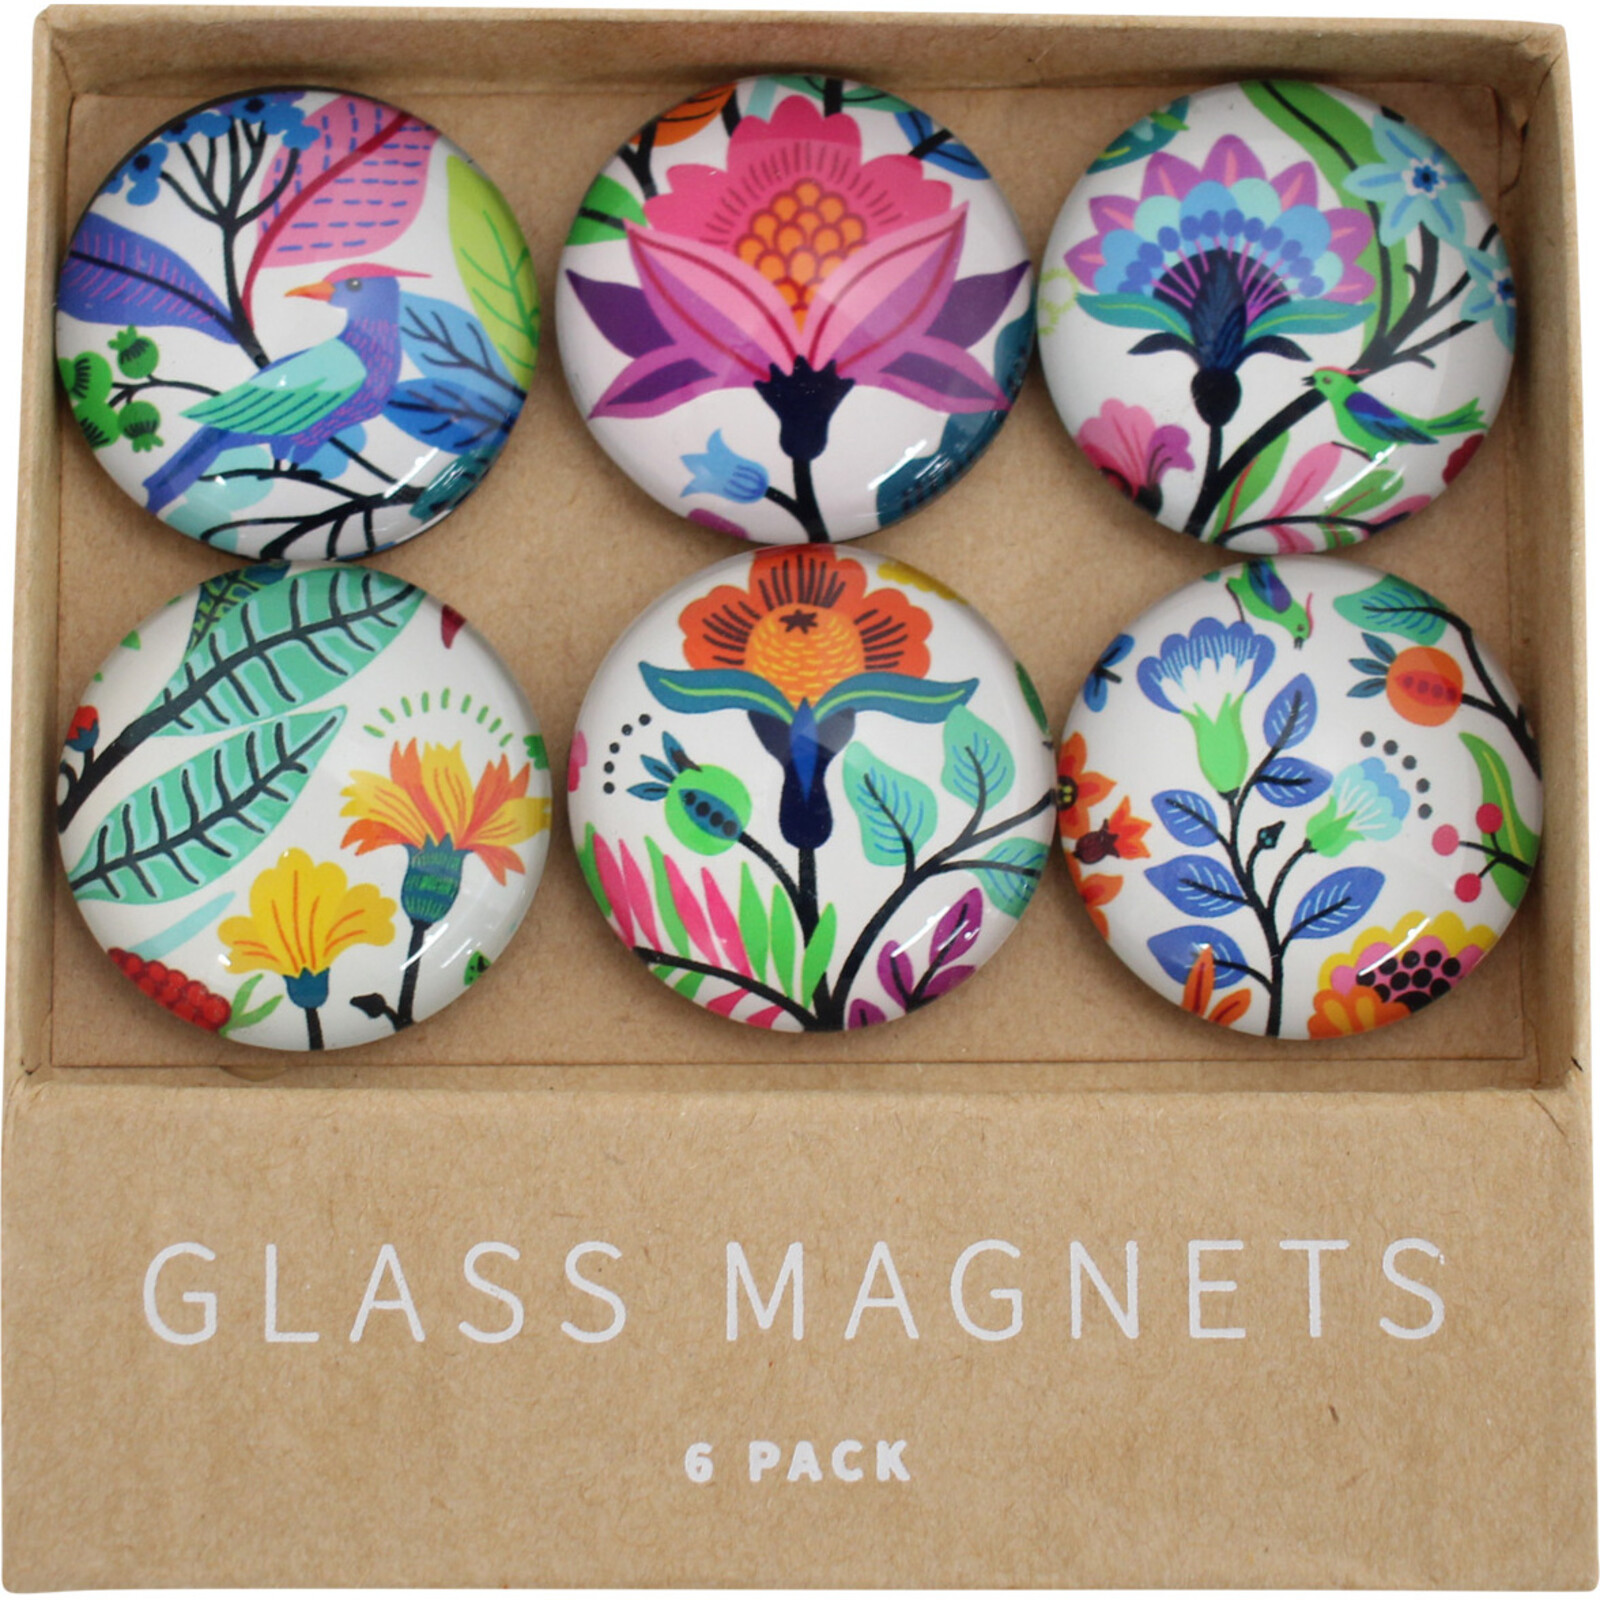 Glass Magnets Bright Flora S/6